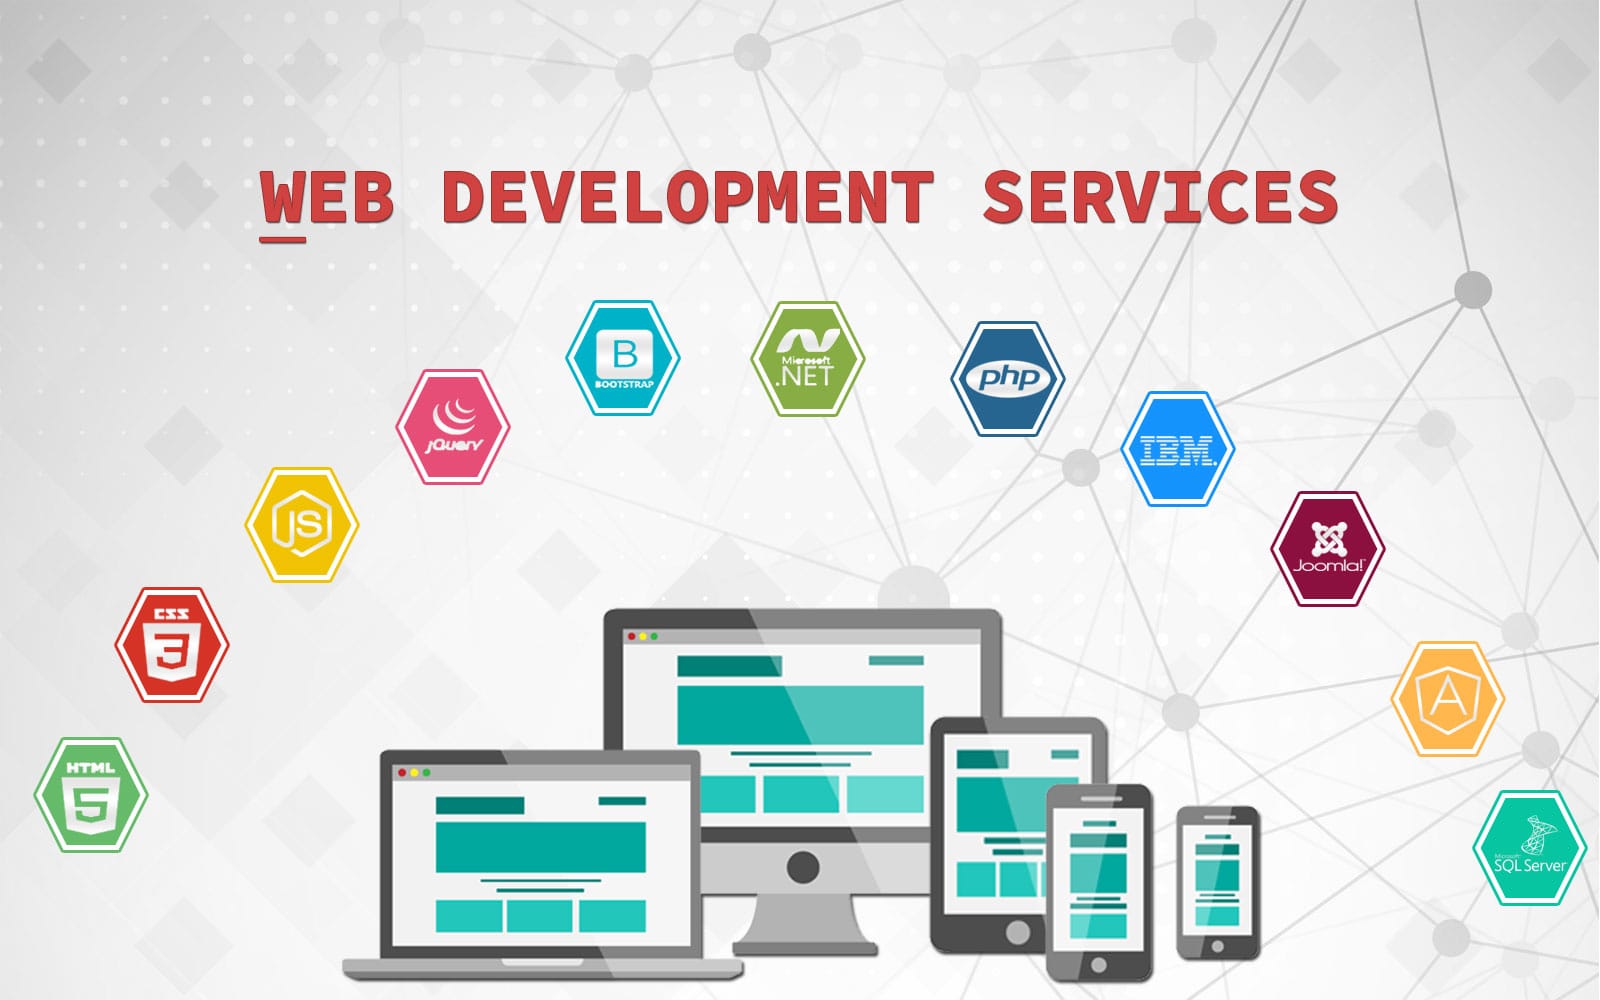 Why Should Your Business Invest in Web Development Services?